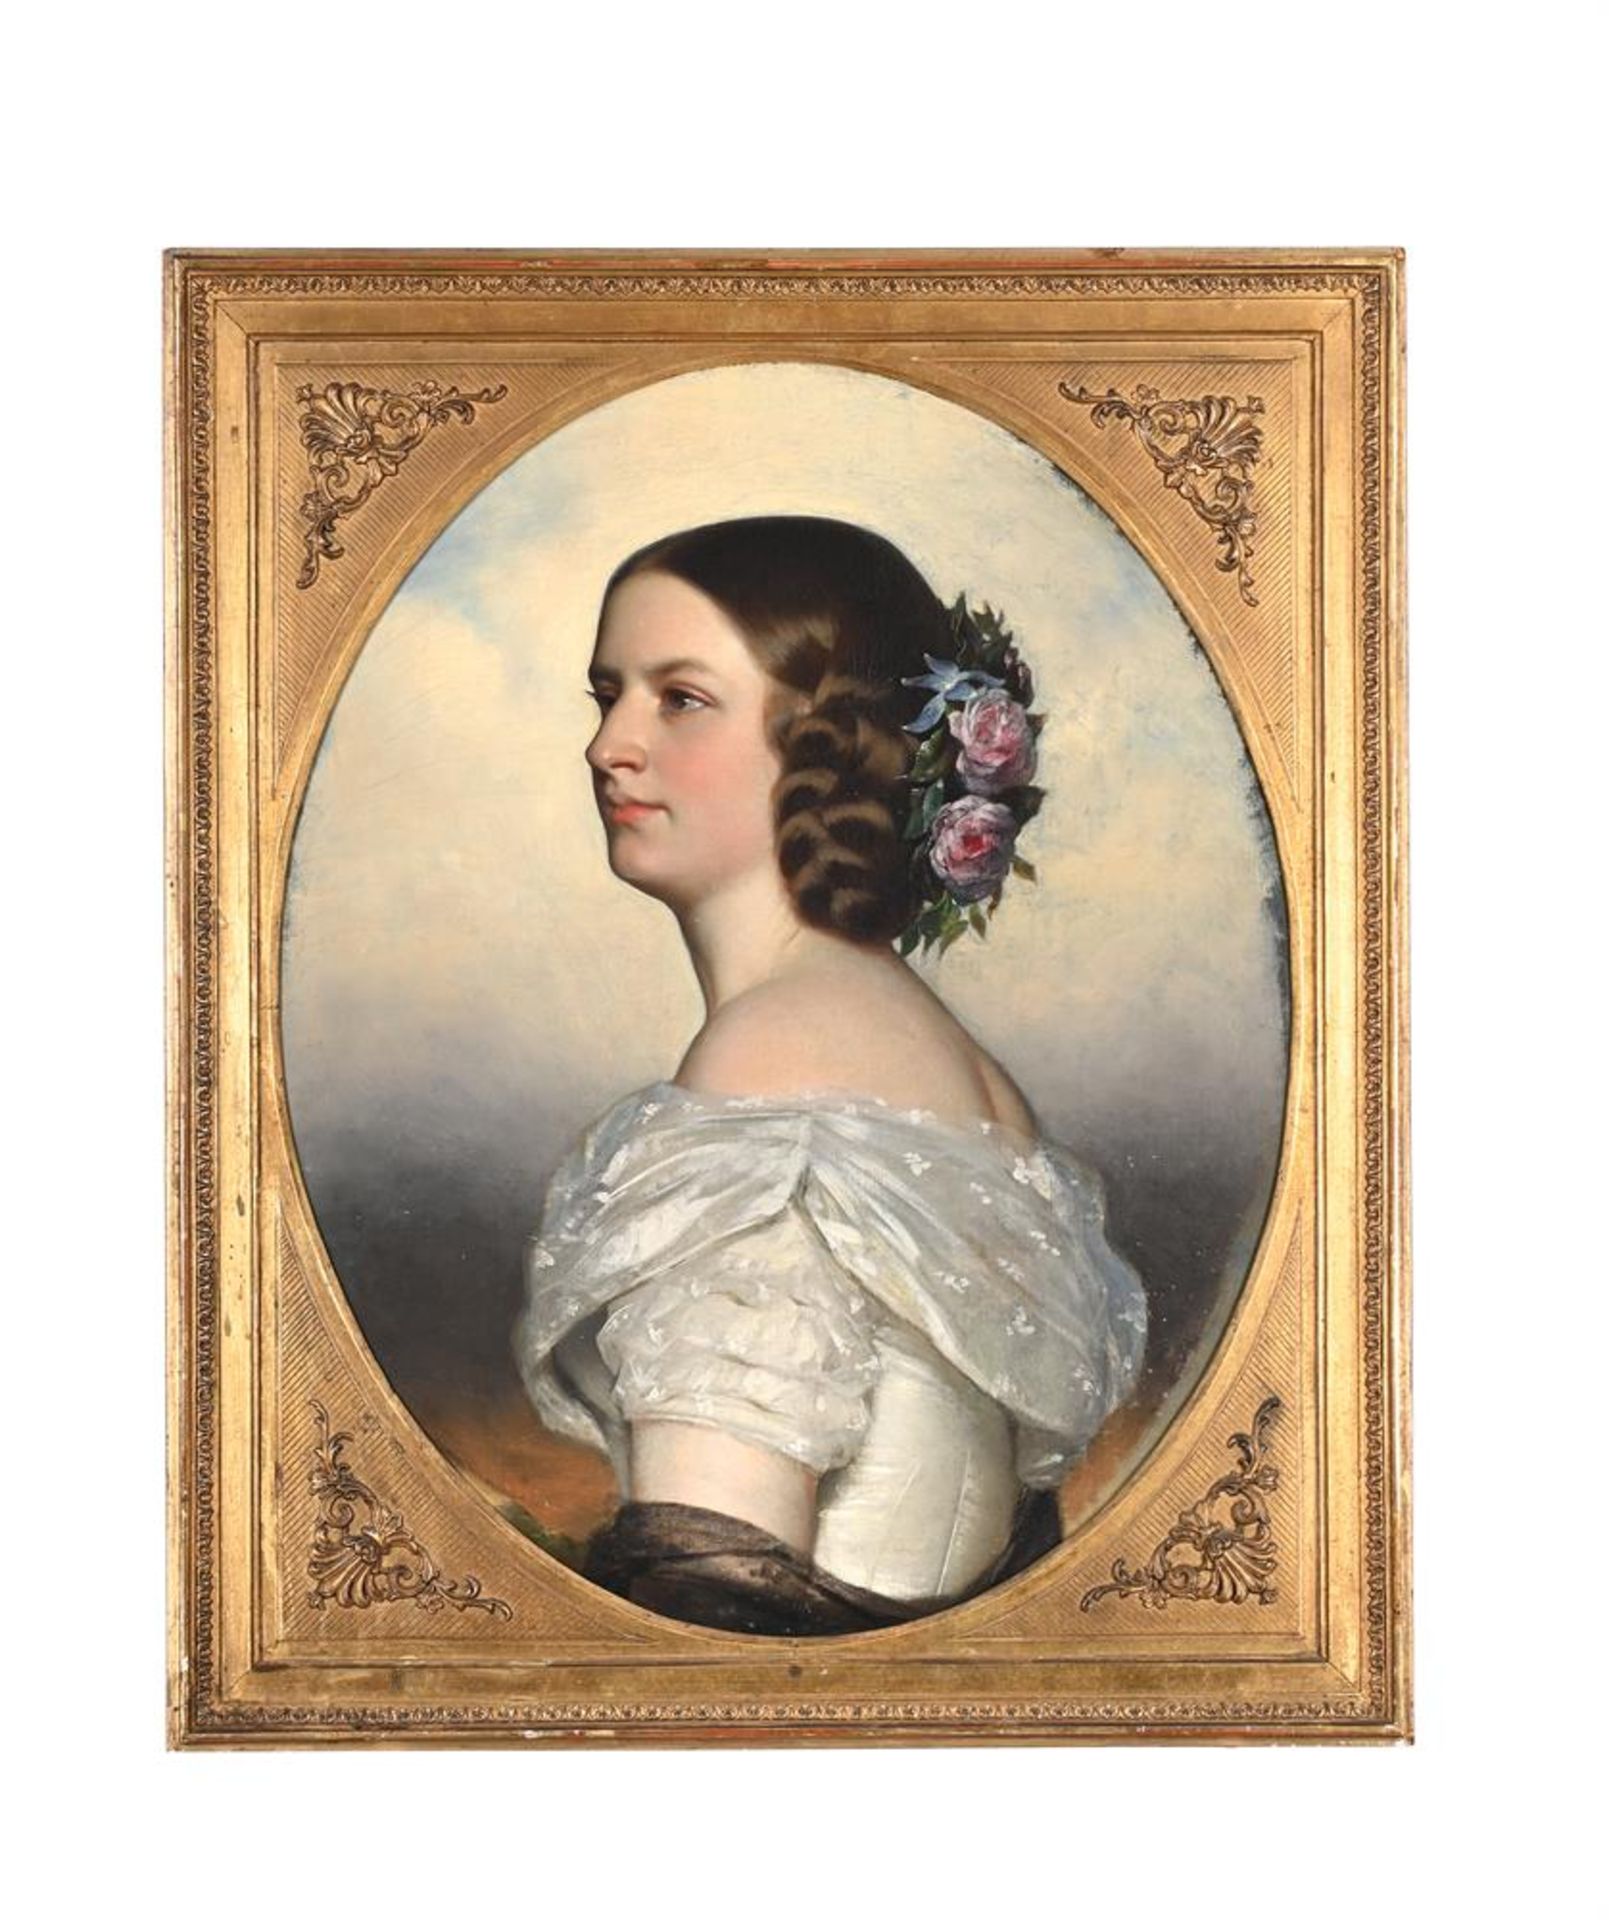 BRITISH SCHOOL (19TH CENTURY), PORTRAIT OF A LADY IN A WHITE DRESS